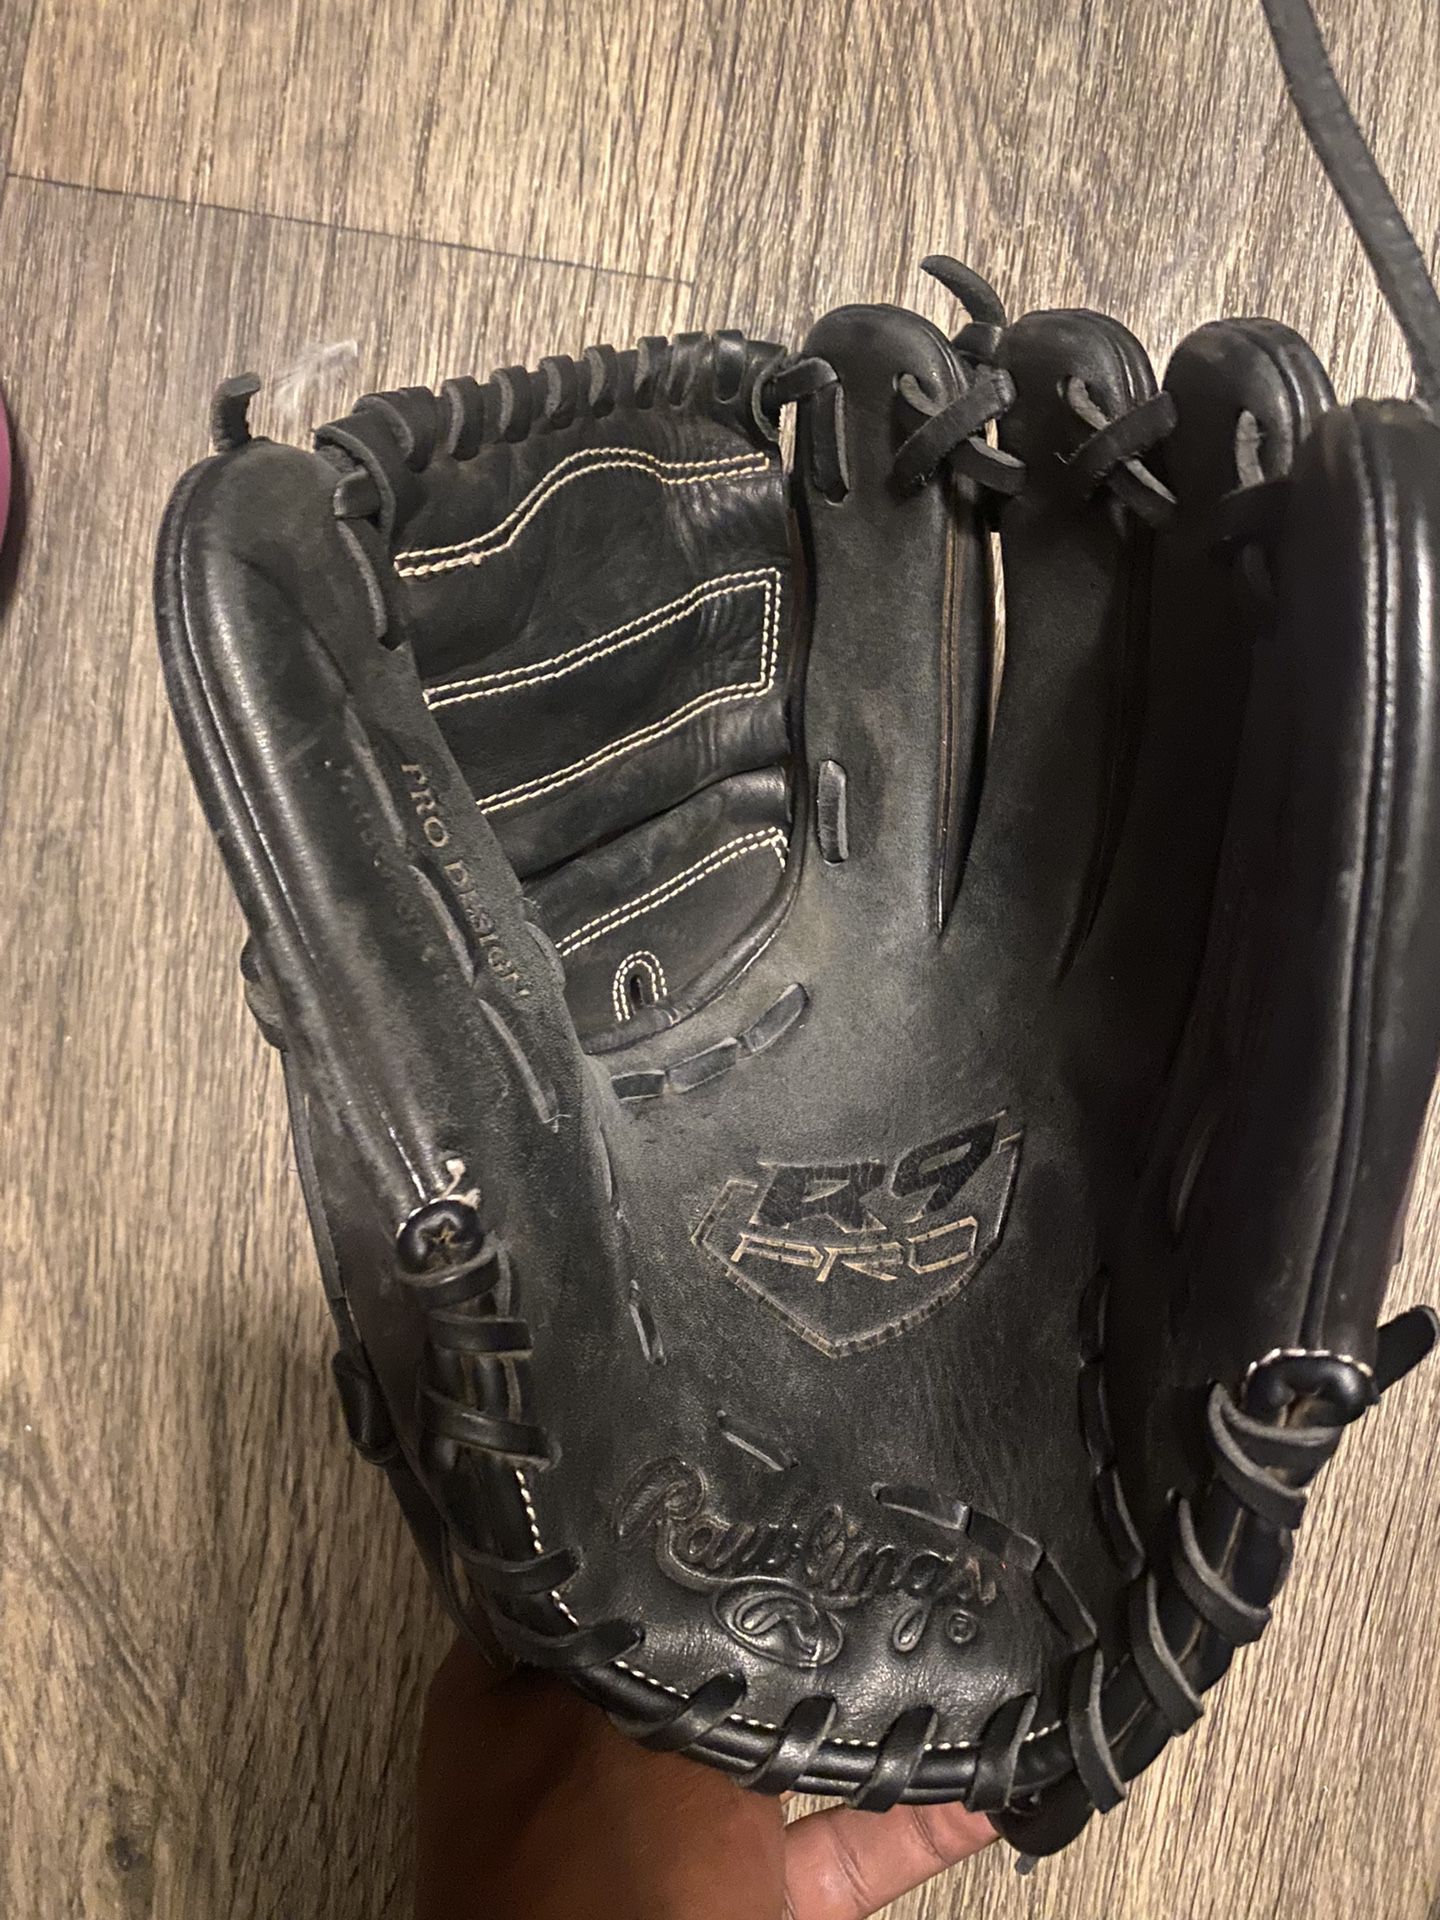 Rawlings R9 Pro Baseball Glove for Sale in Fort Worth, TX - OfferUp